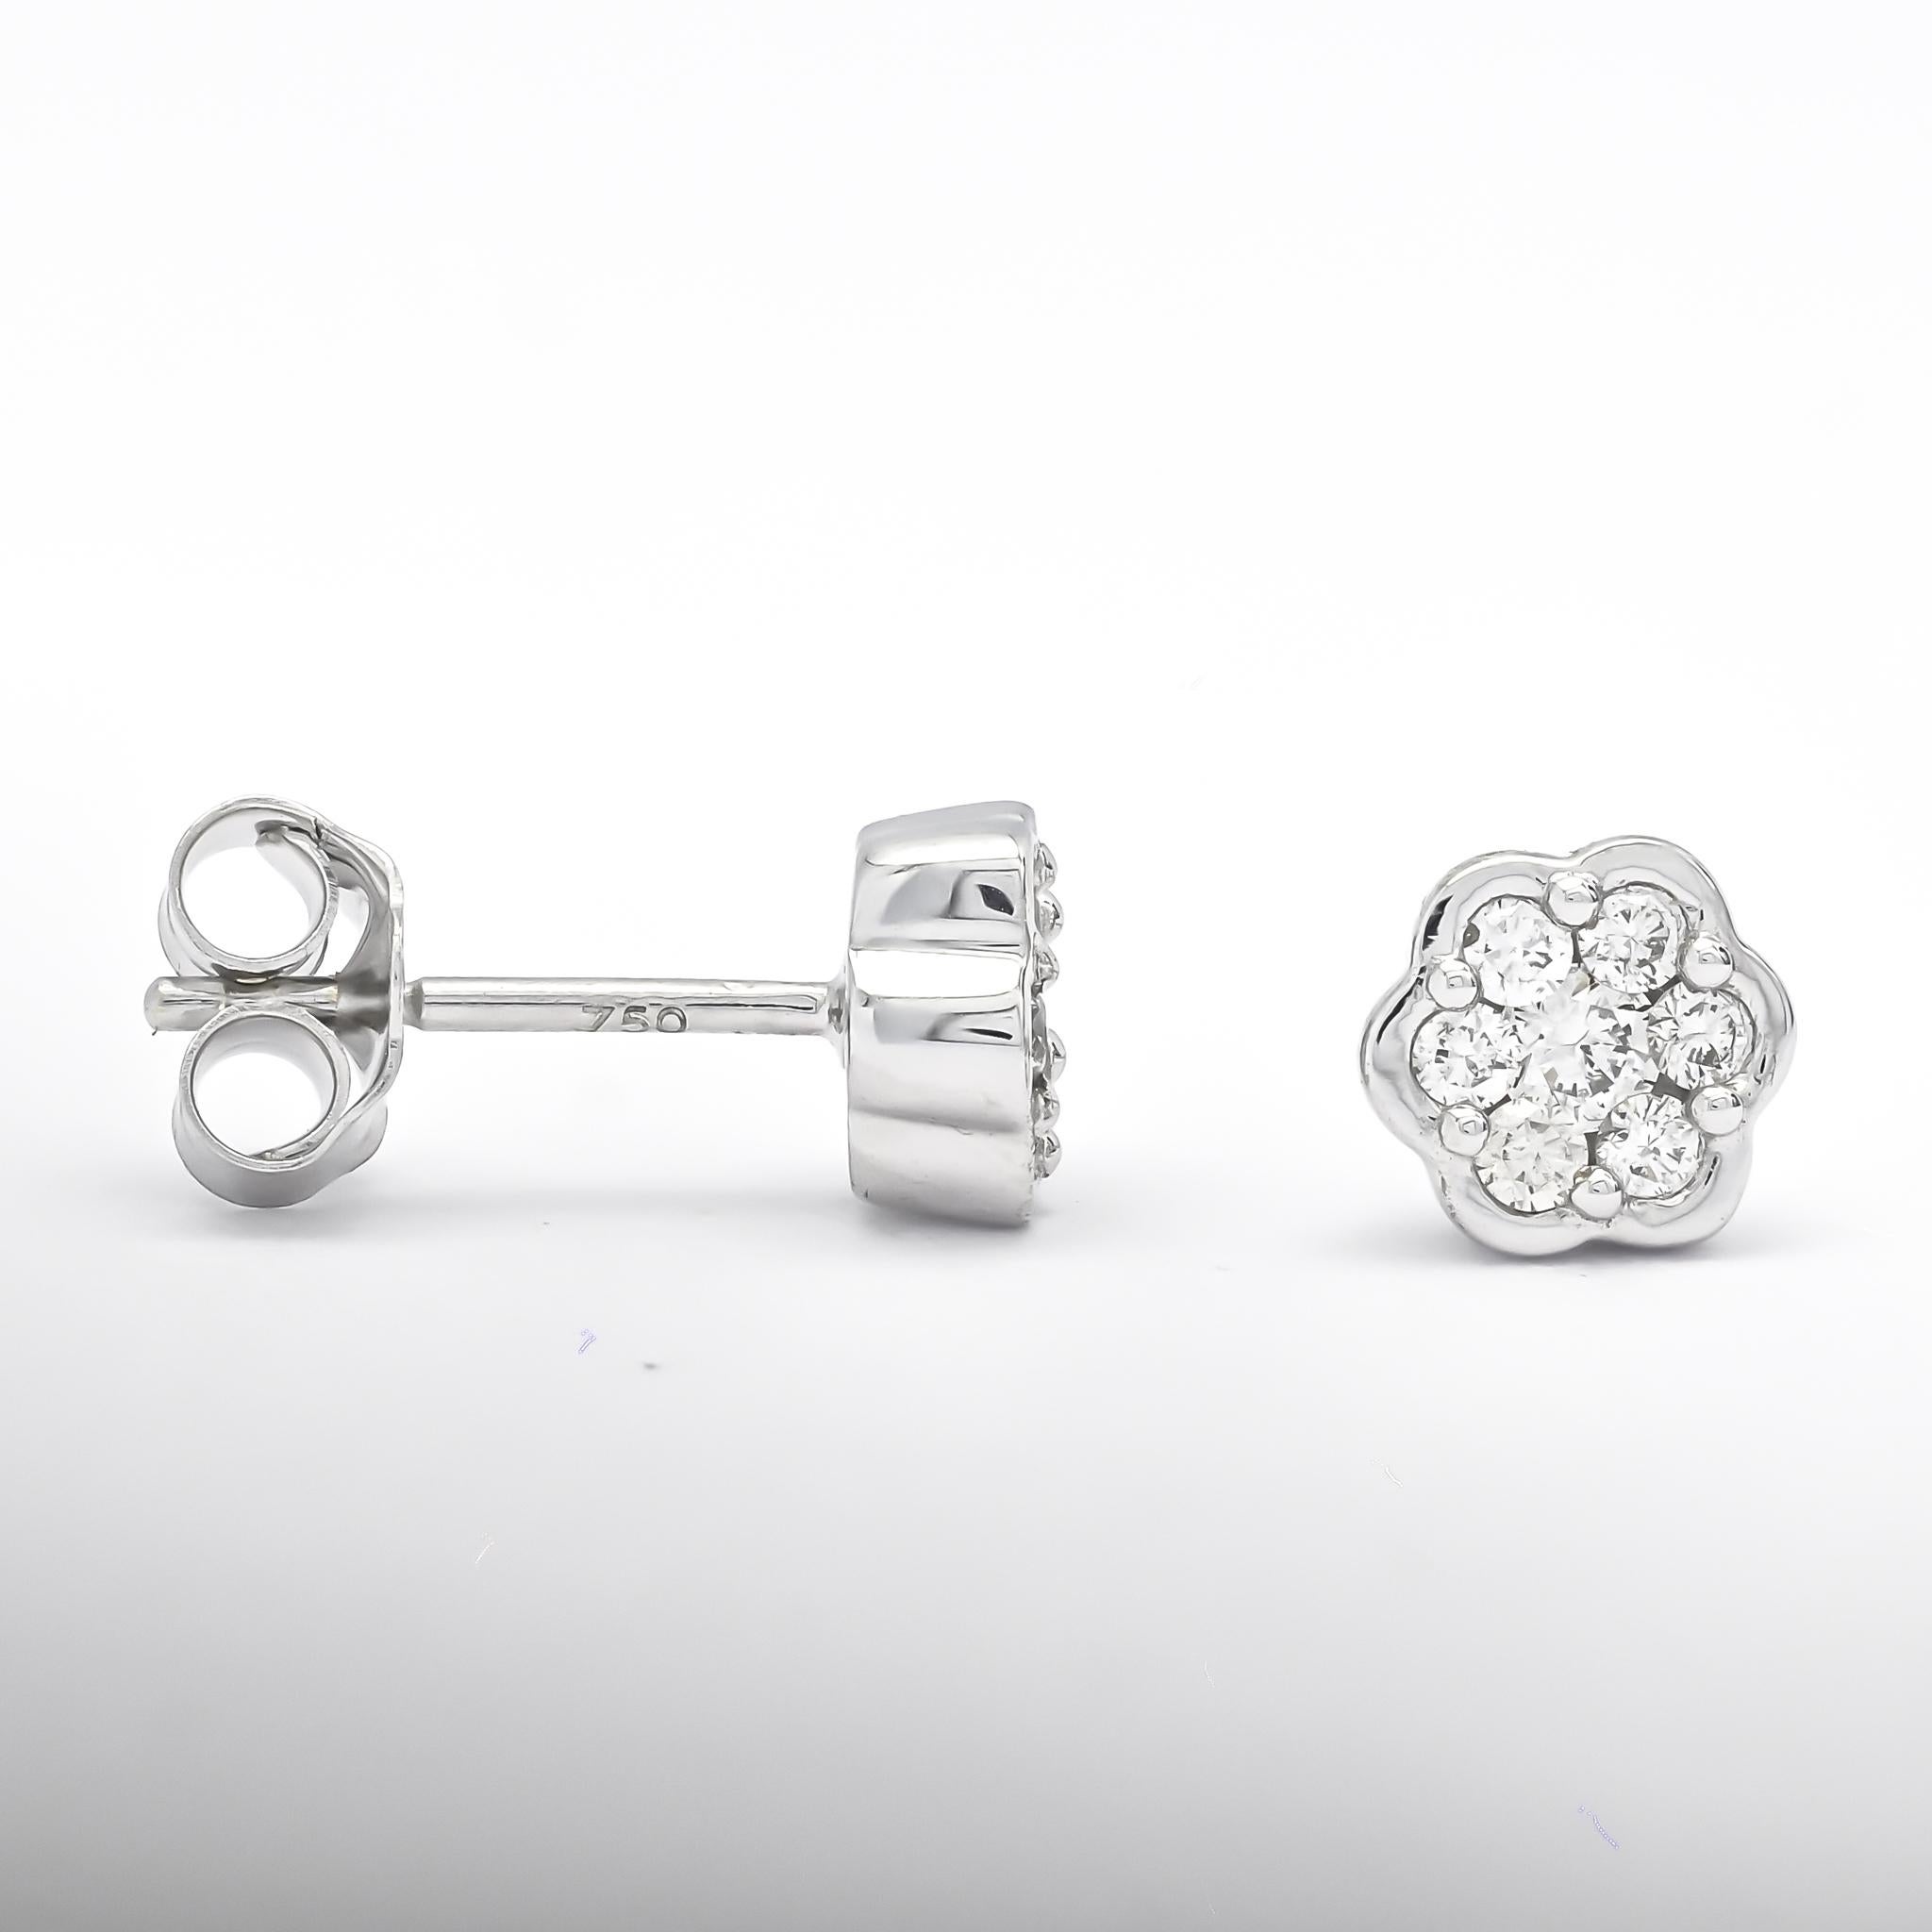 These magnificent and dazzling 18KT White Gold Natural Diamonds Flower Bezel set Cluster Stud Earrings are made with incredible craftsmanship and top quality. These earrings are made from 100% natural diamonds and are highly polished for a better